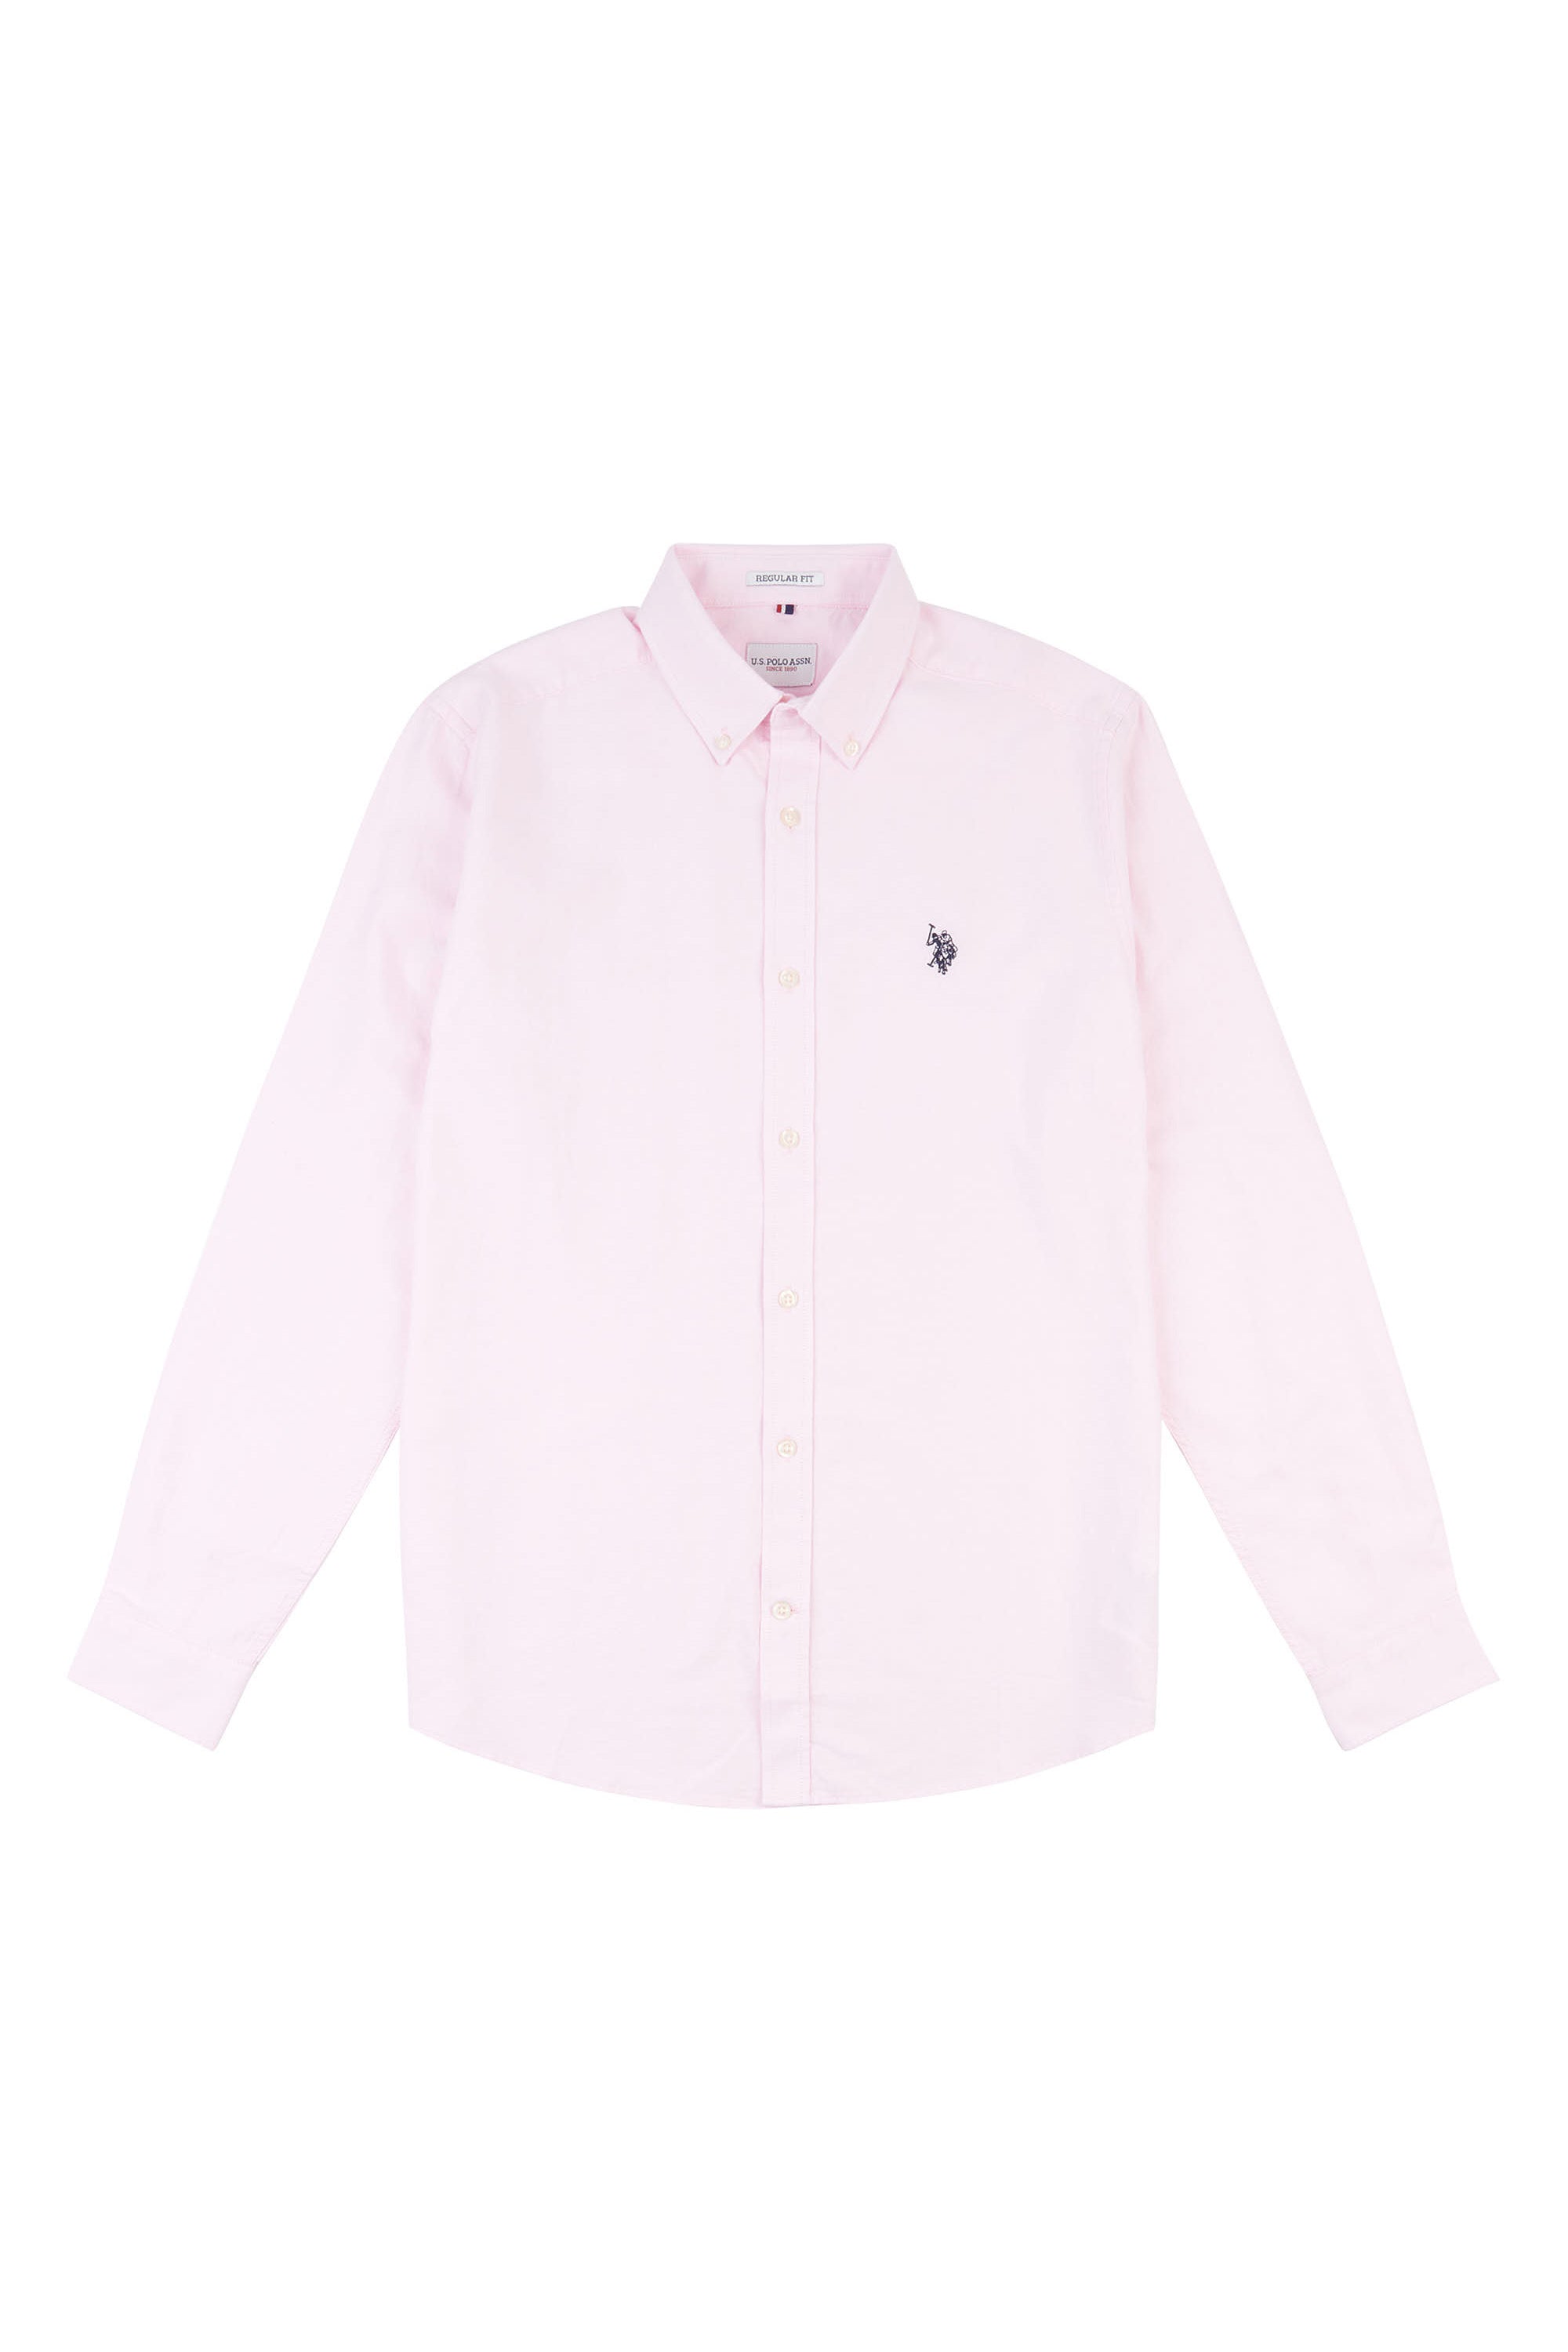 Mens Oxford Shirt in Orchid Pink